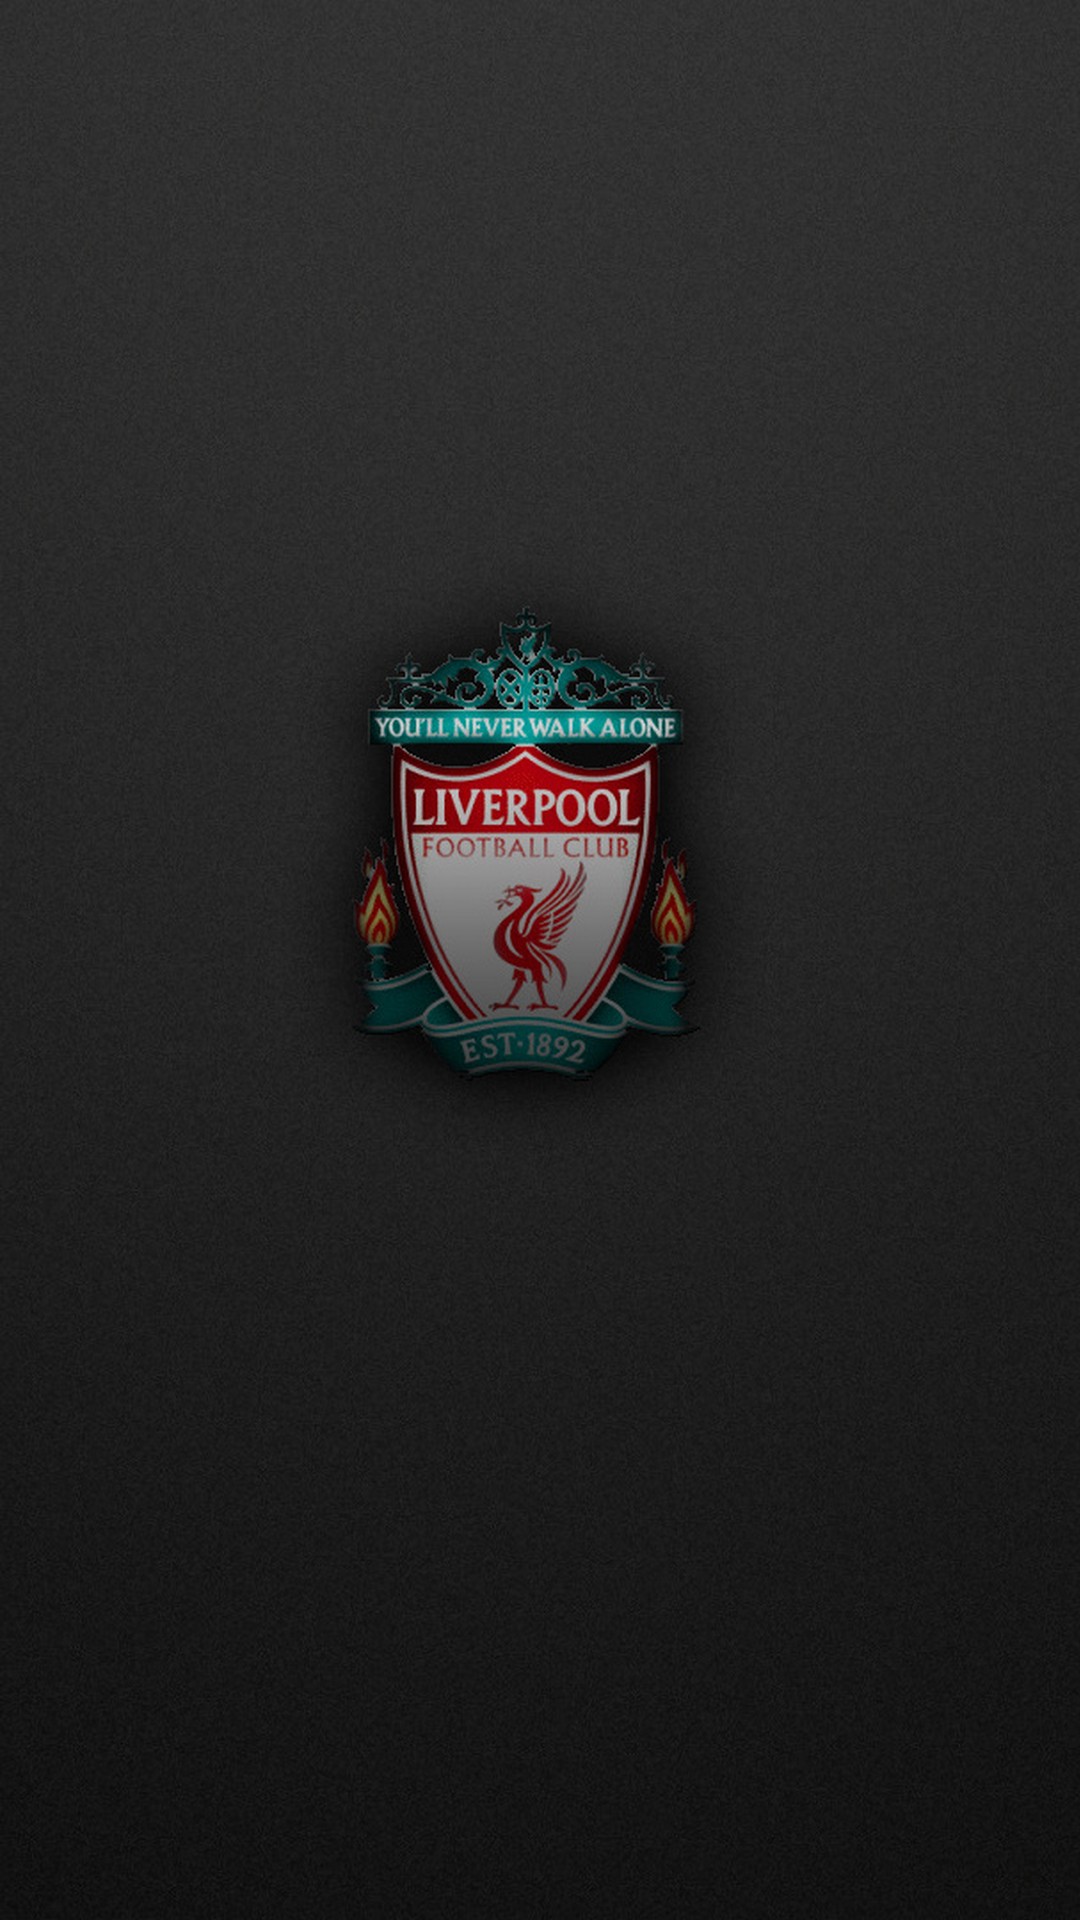 Mobile Wallpaper HD Liverpool with high-resolution 1080x1920 pixel. You can use this wallpaper for your Desktop Computers, Mac Screensavers, Windows Backgrounds, iPhone Wallpapers, Tablet or Android Lock screen and another Mobile device